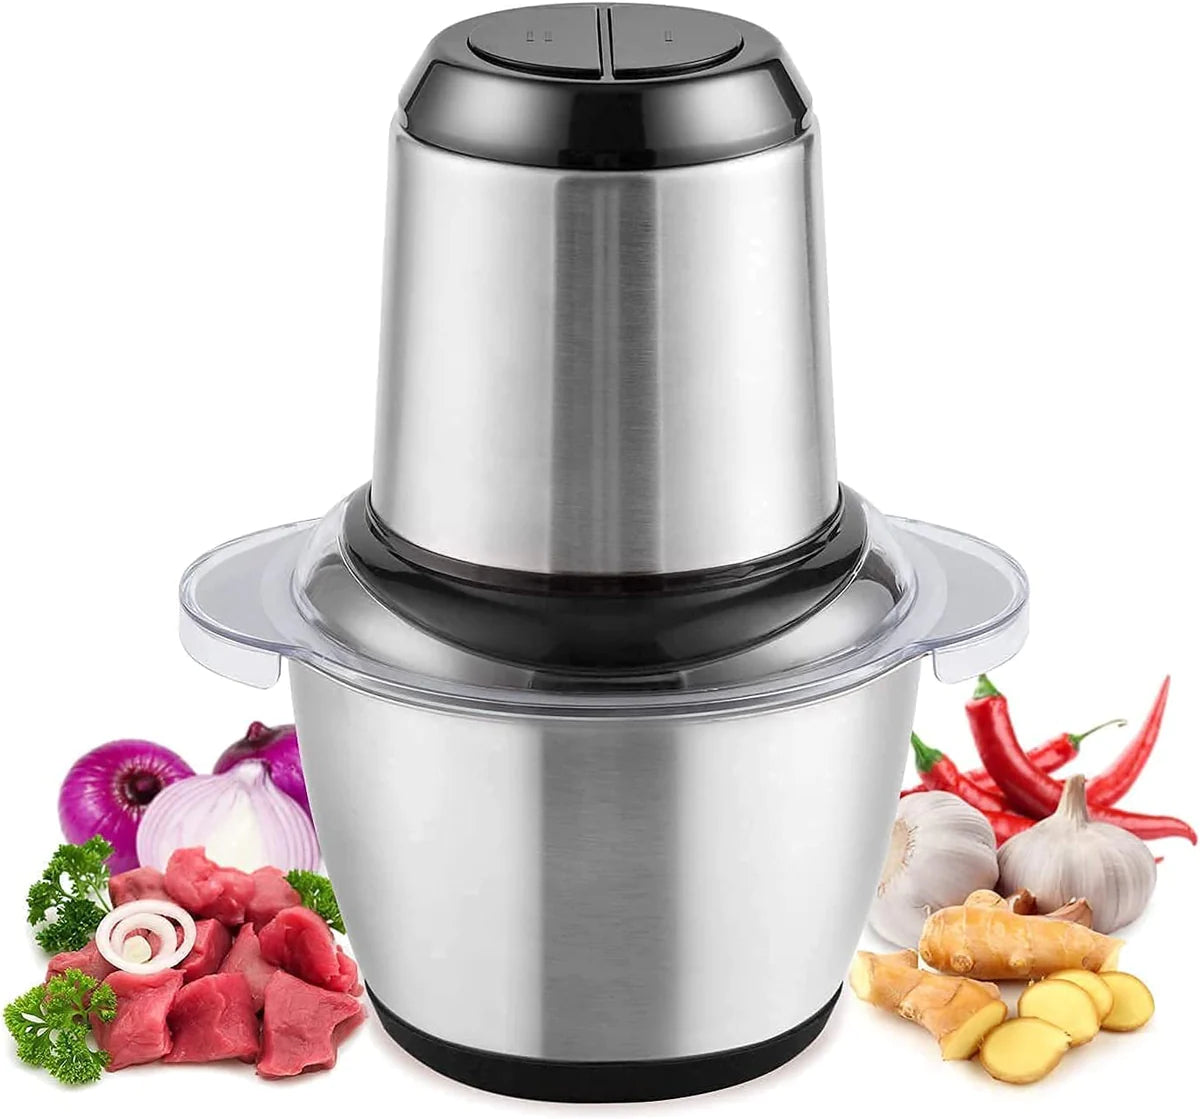 Extra Power Stainless Steel Electric Meat & Food Grinder